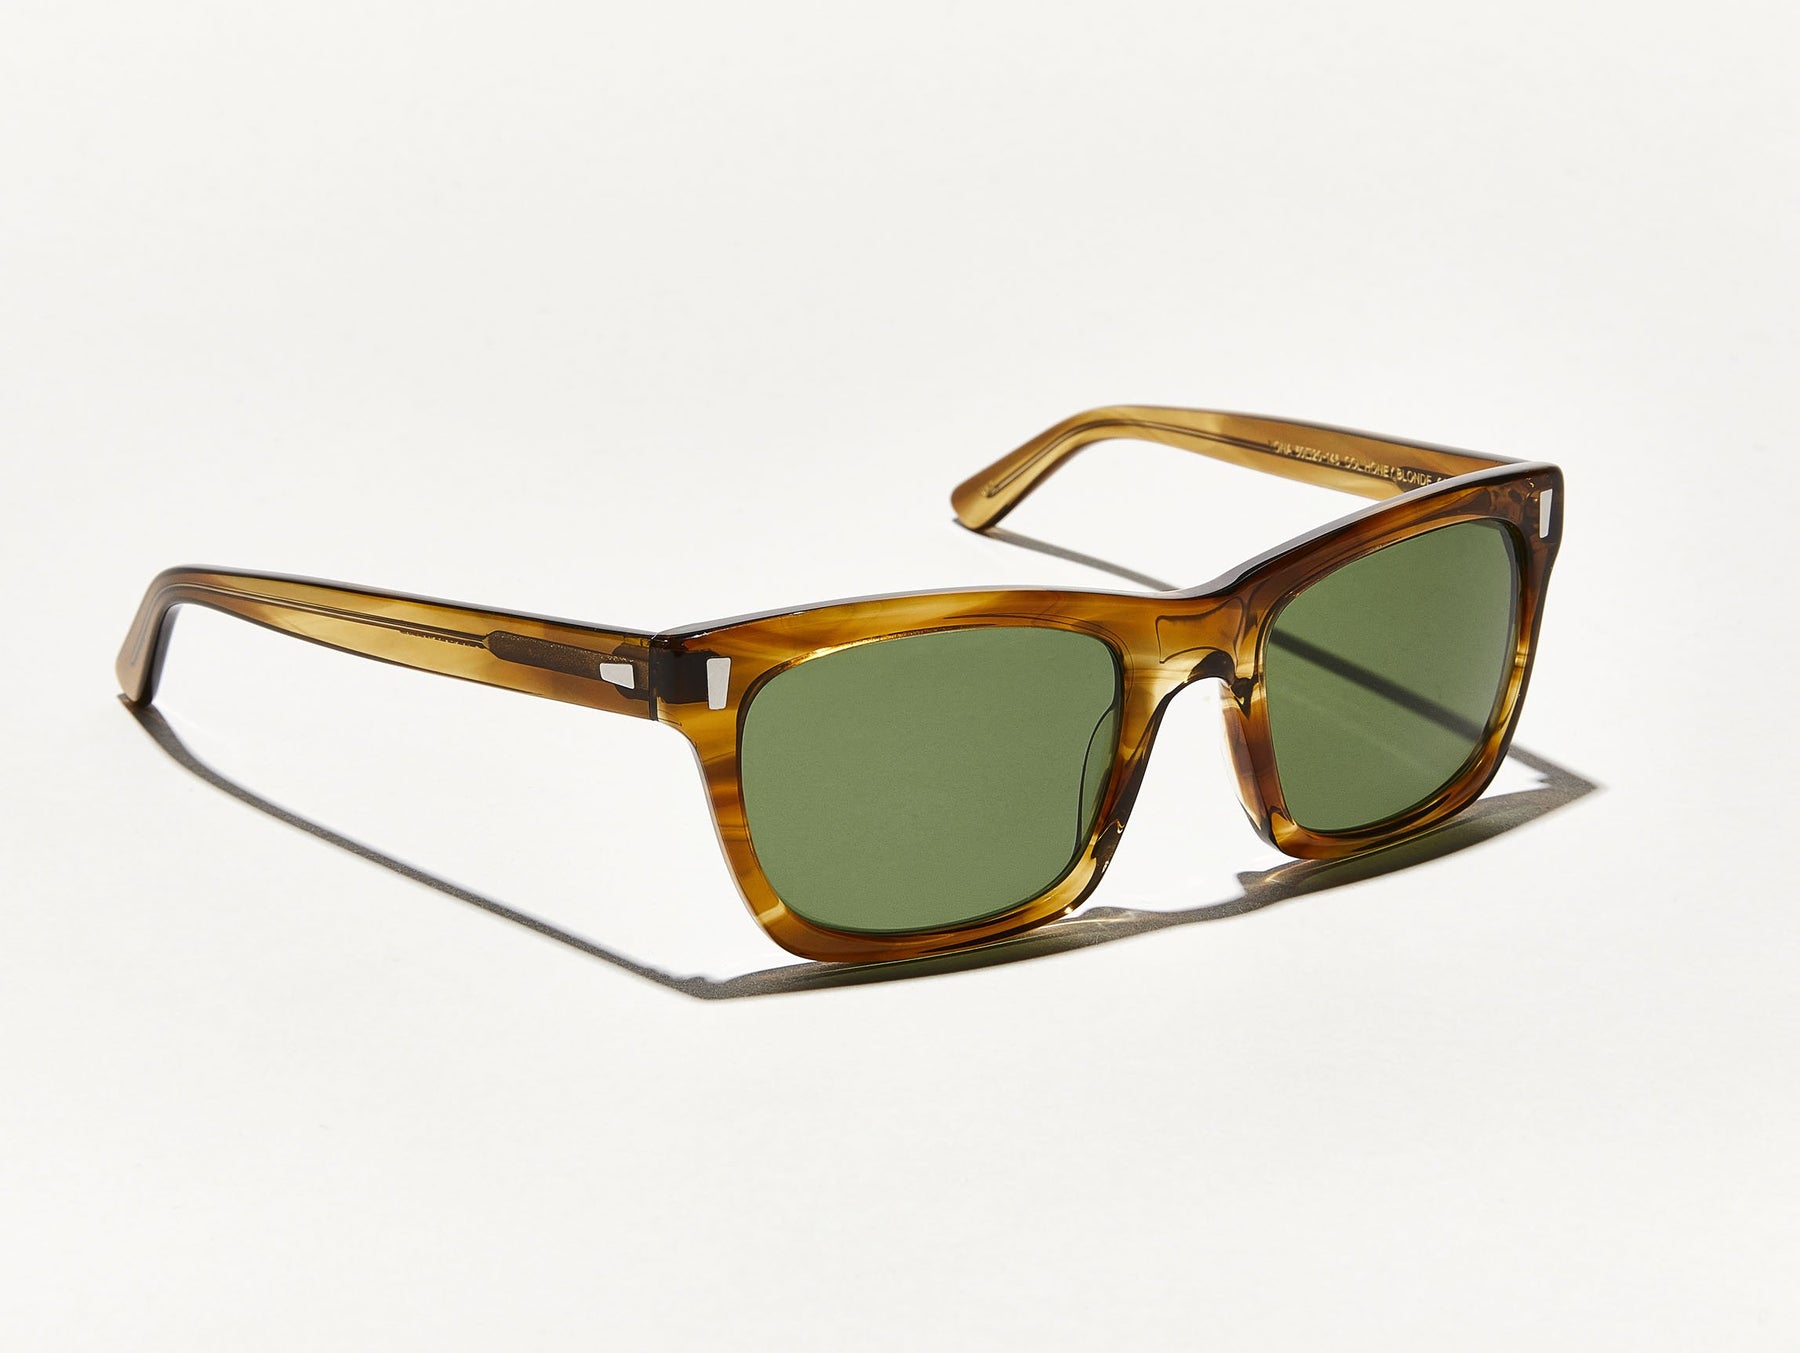 The YONA SUN in Honey Blonde with Calibar Green Glass Lenses